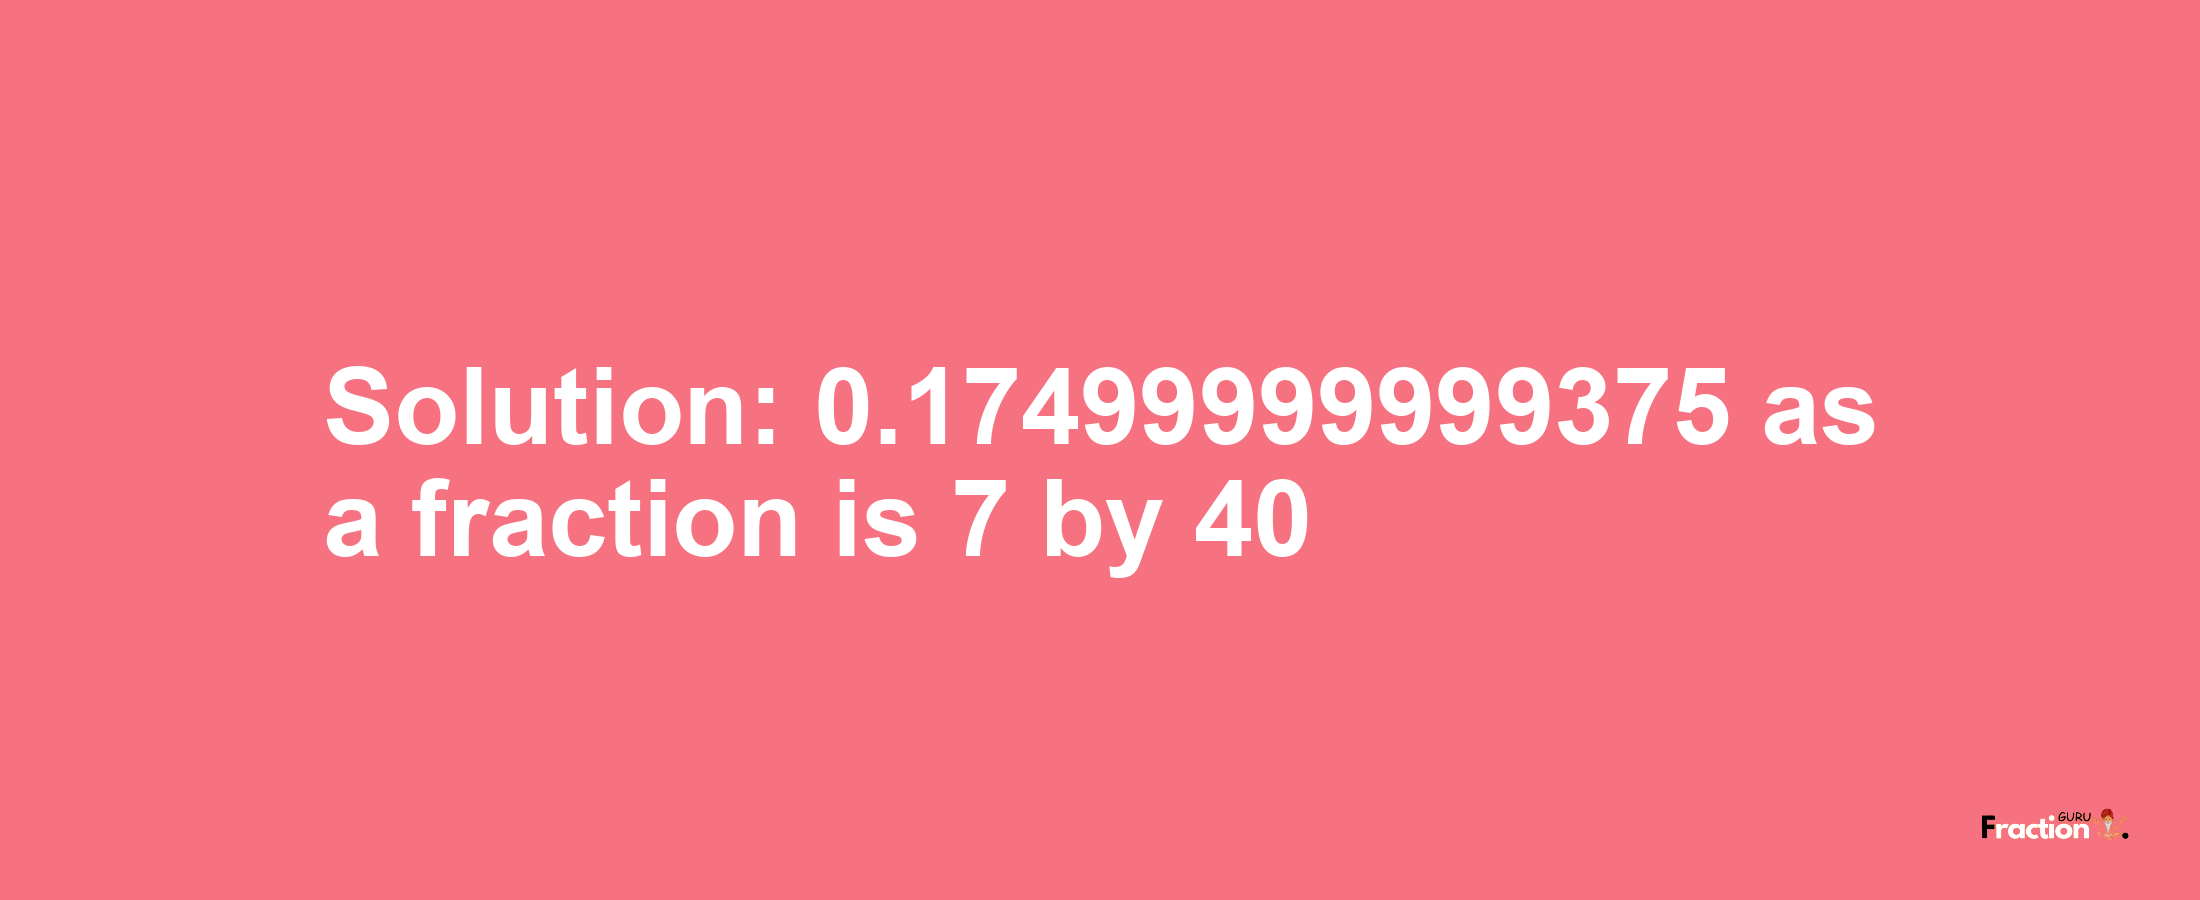 Solution:0.17499999999375 as a fraction is 7/40